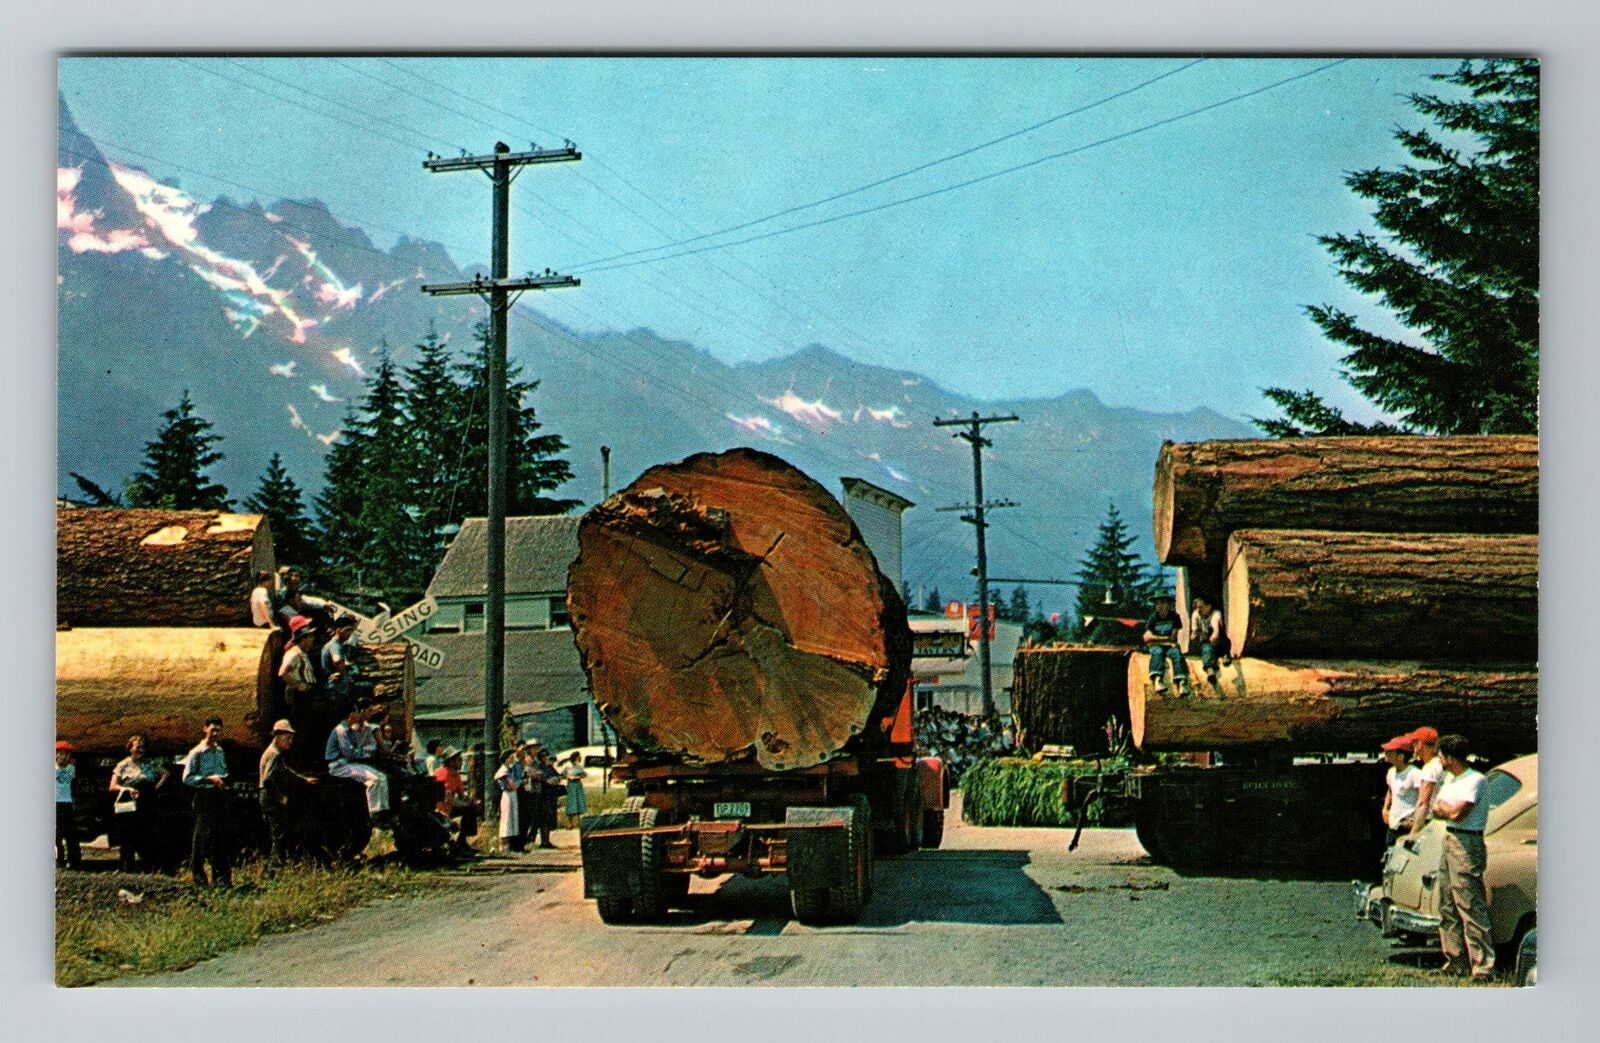 OR-Oregon Huge Logs Heading To A Nearby Mill Antique Vintage Souvenir Postcard